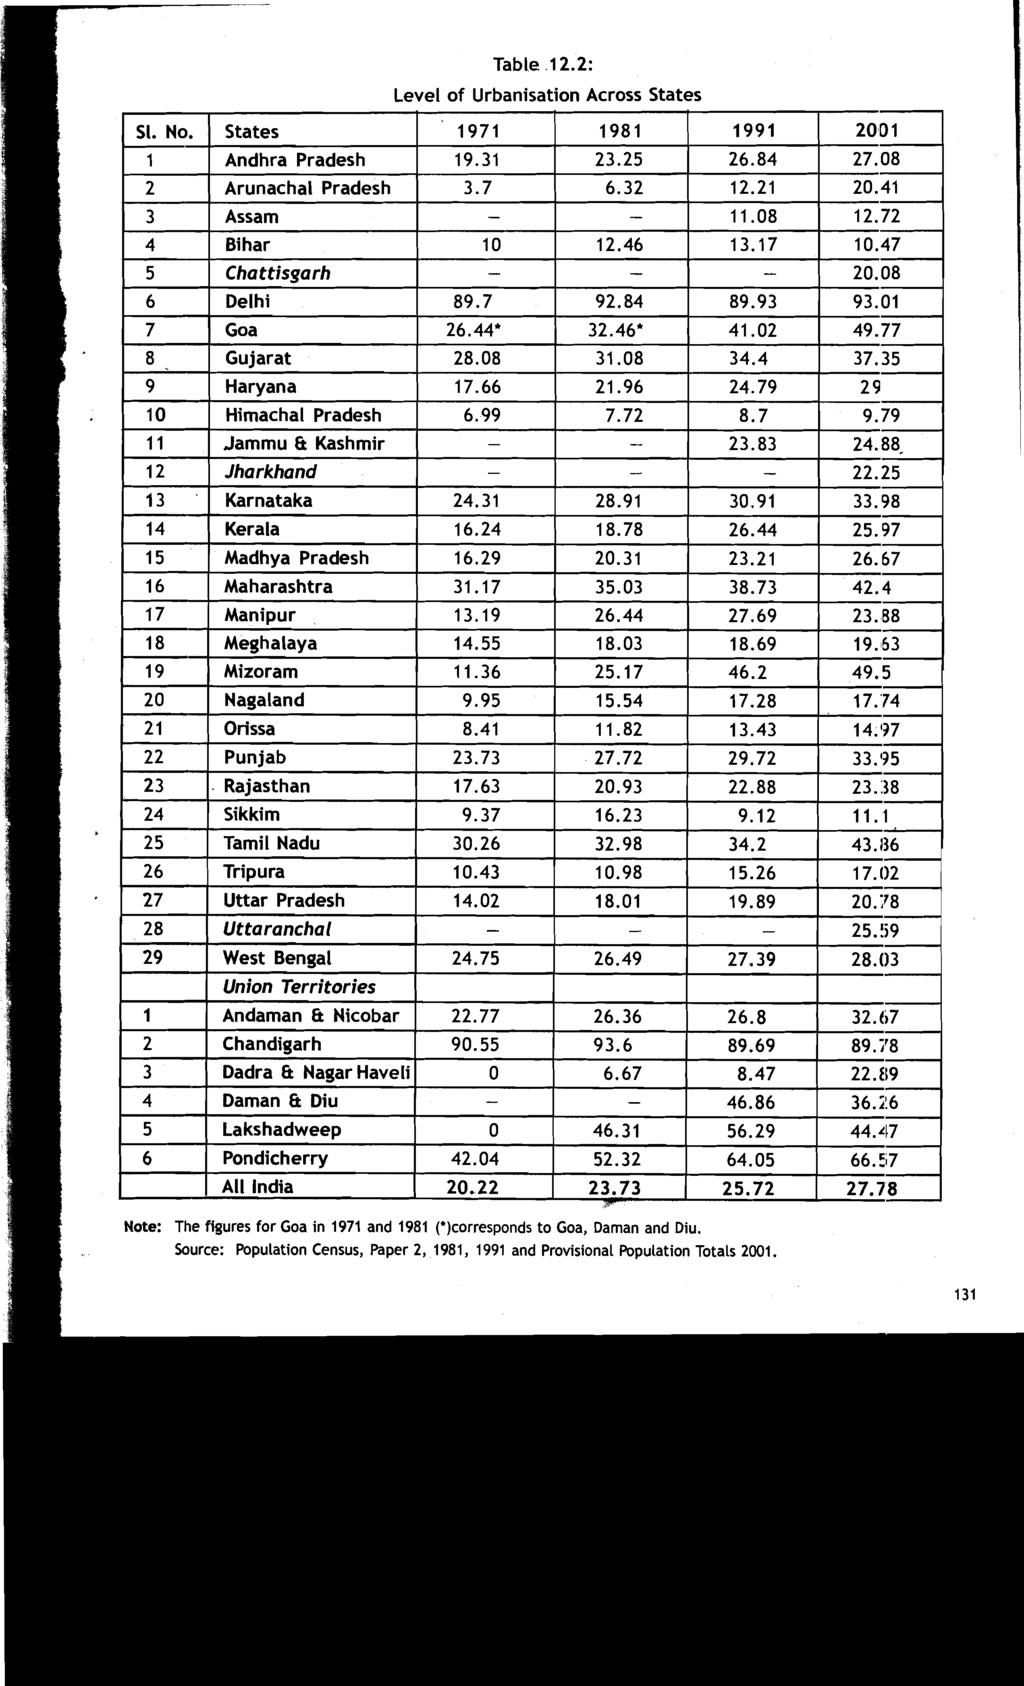 Table 12.2: Note: The figures for Goa in 1971 and 1981 (')corresponds to Goa, Daman and Diu.